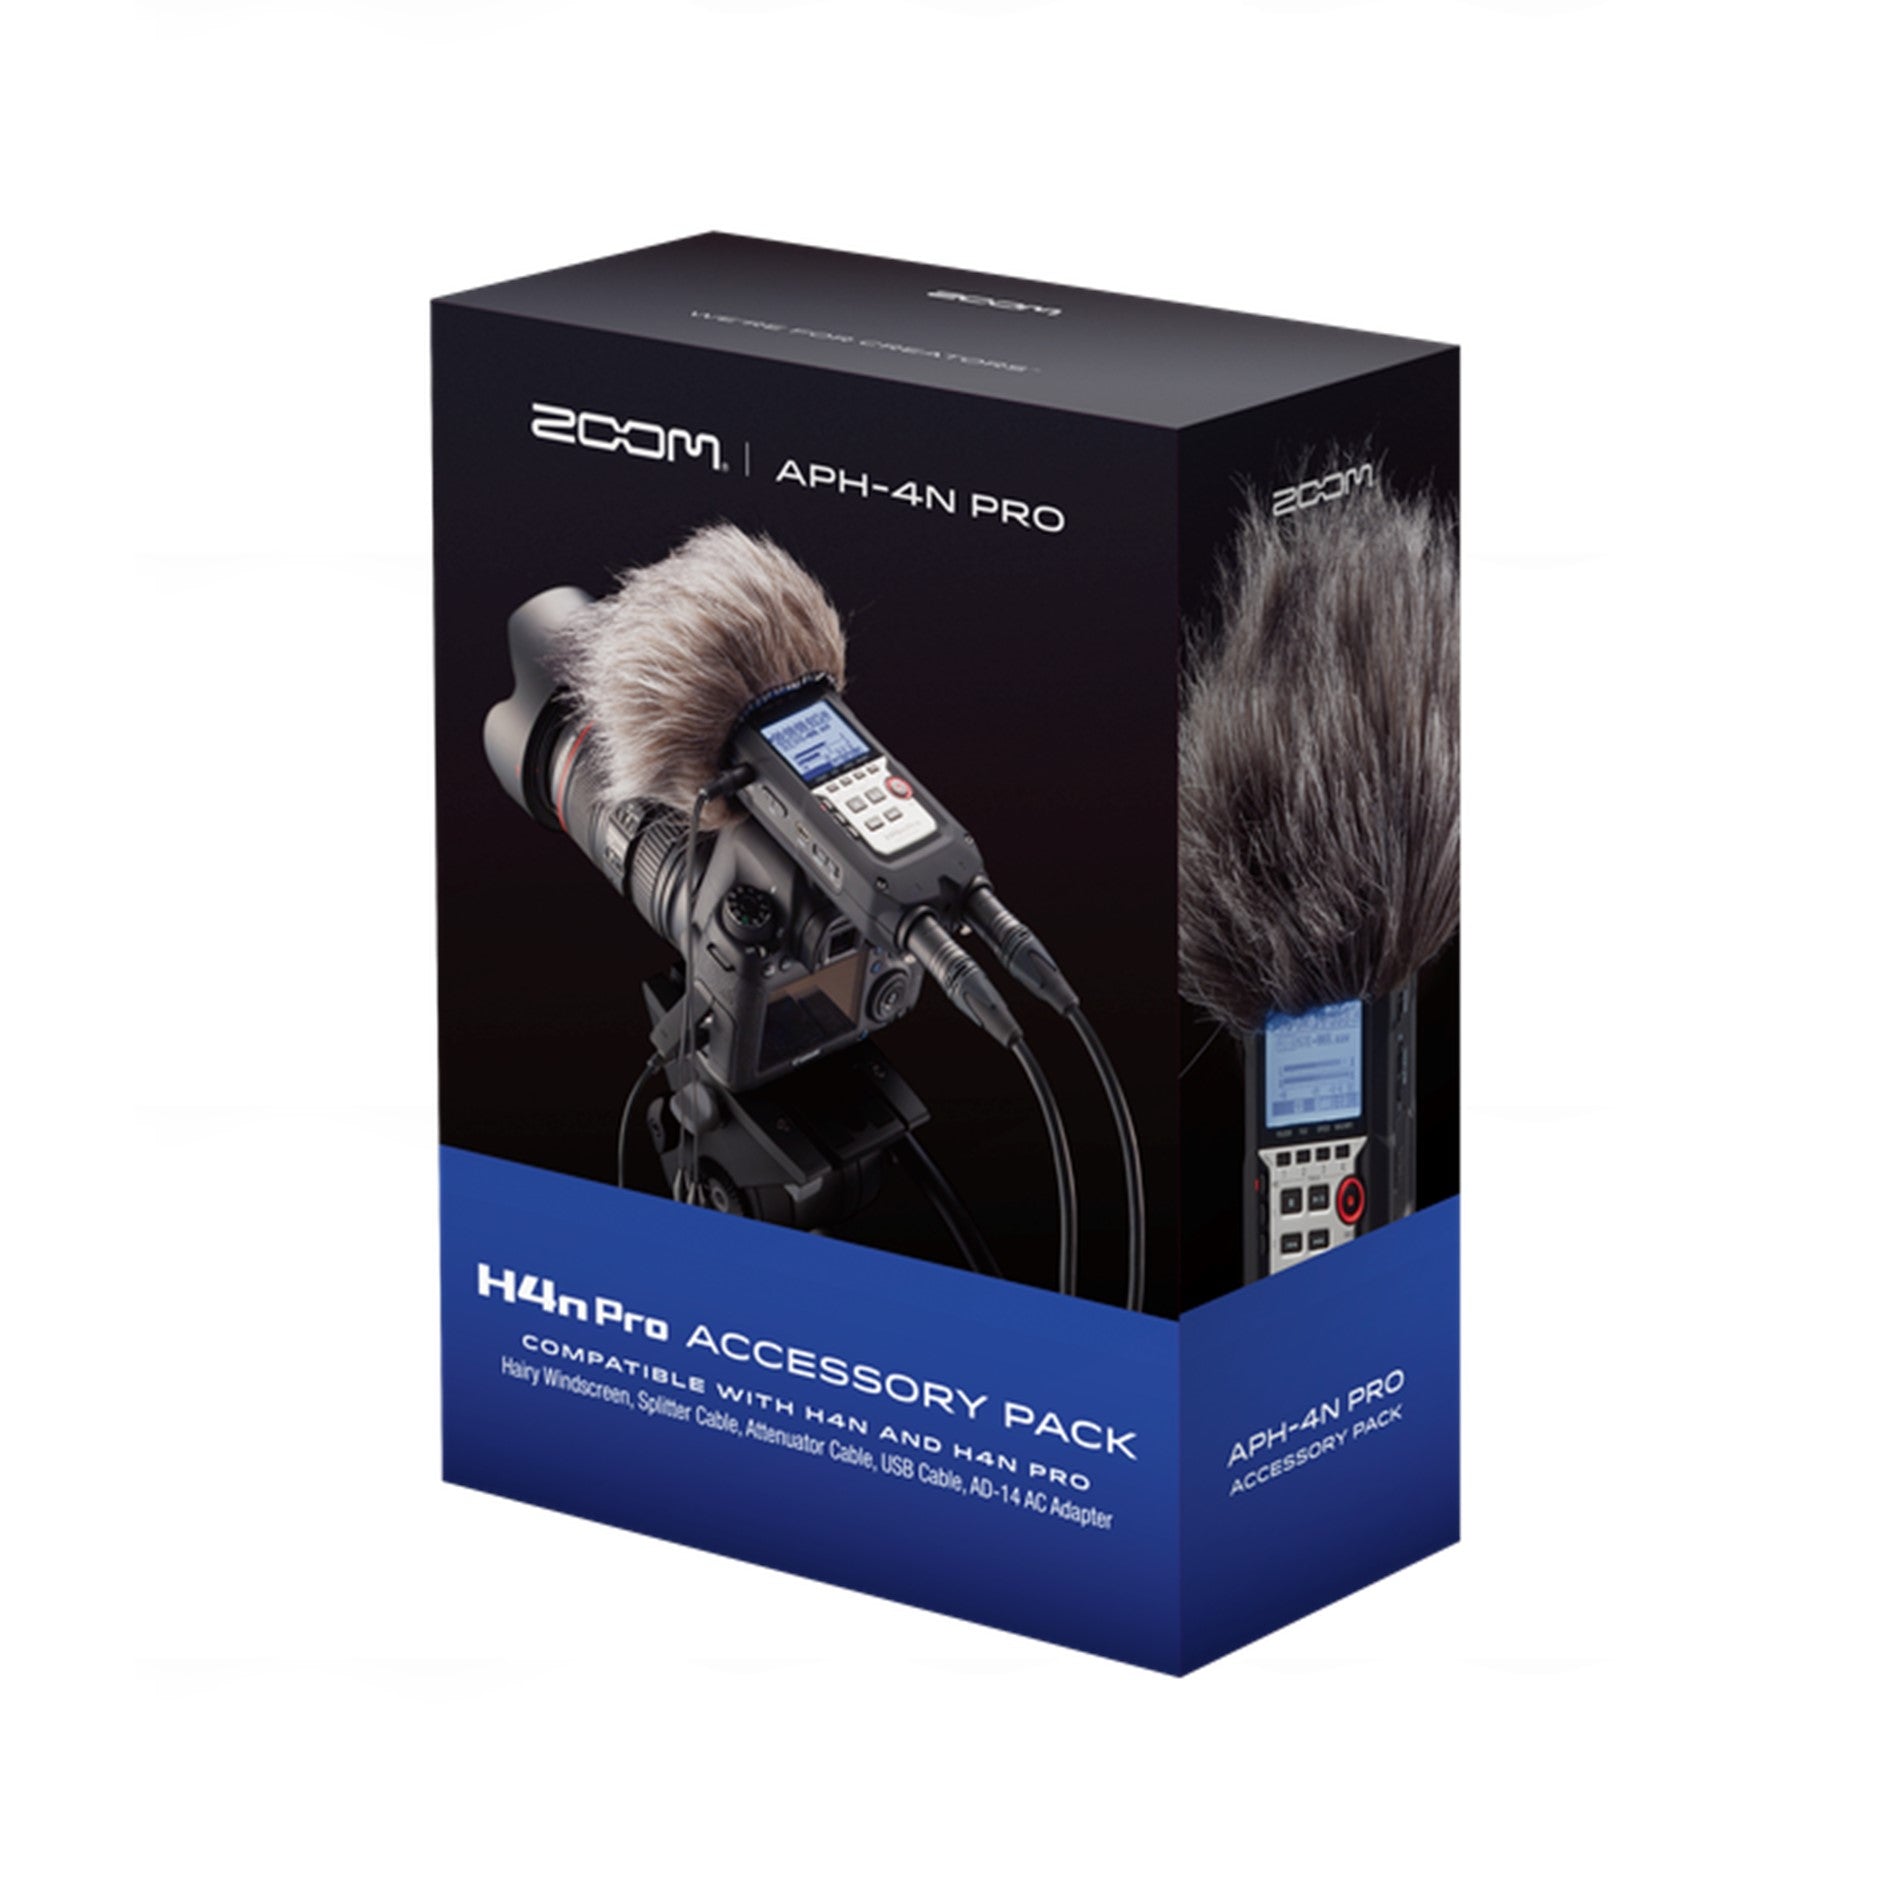 Zoom APH-4nPro H4n Pro Accessory Pack for DSLR